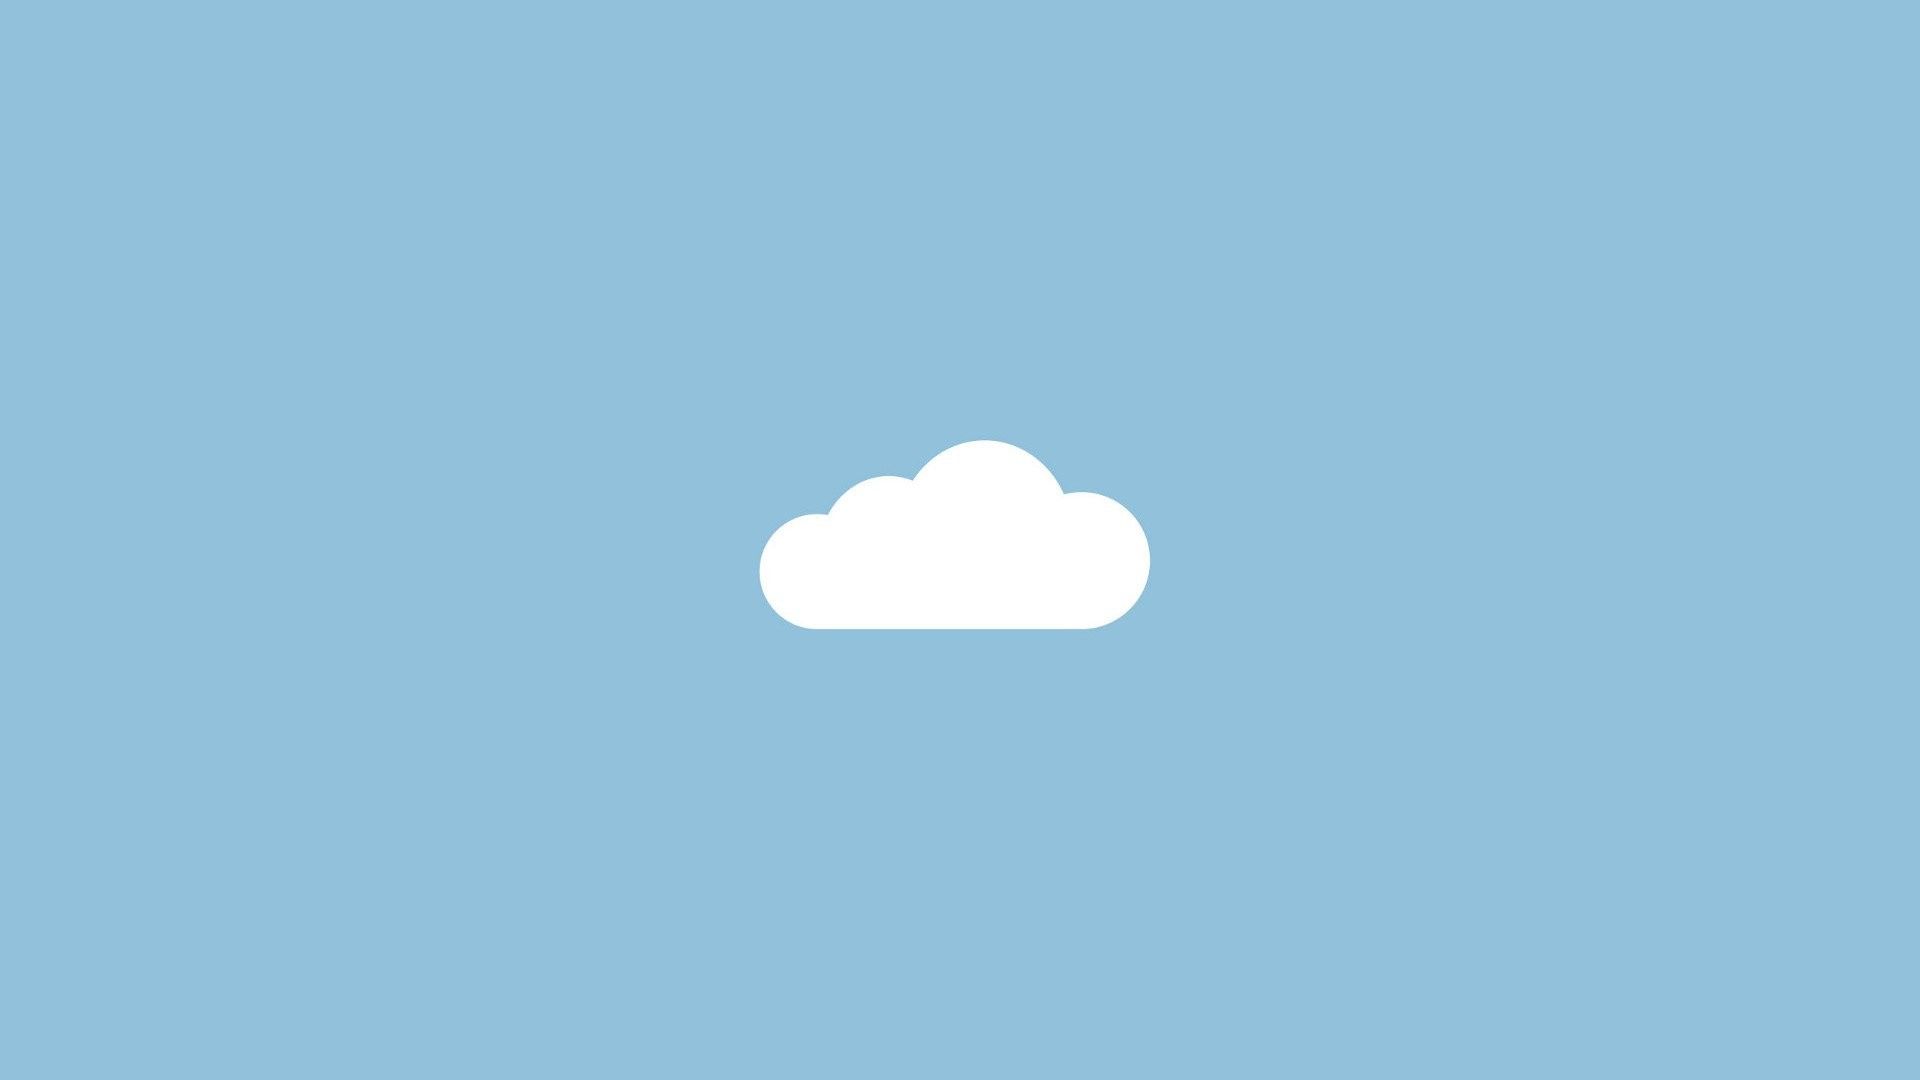 A white cloud on a blue background - Simple